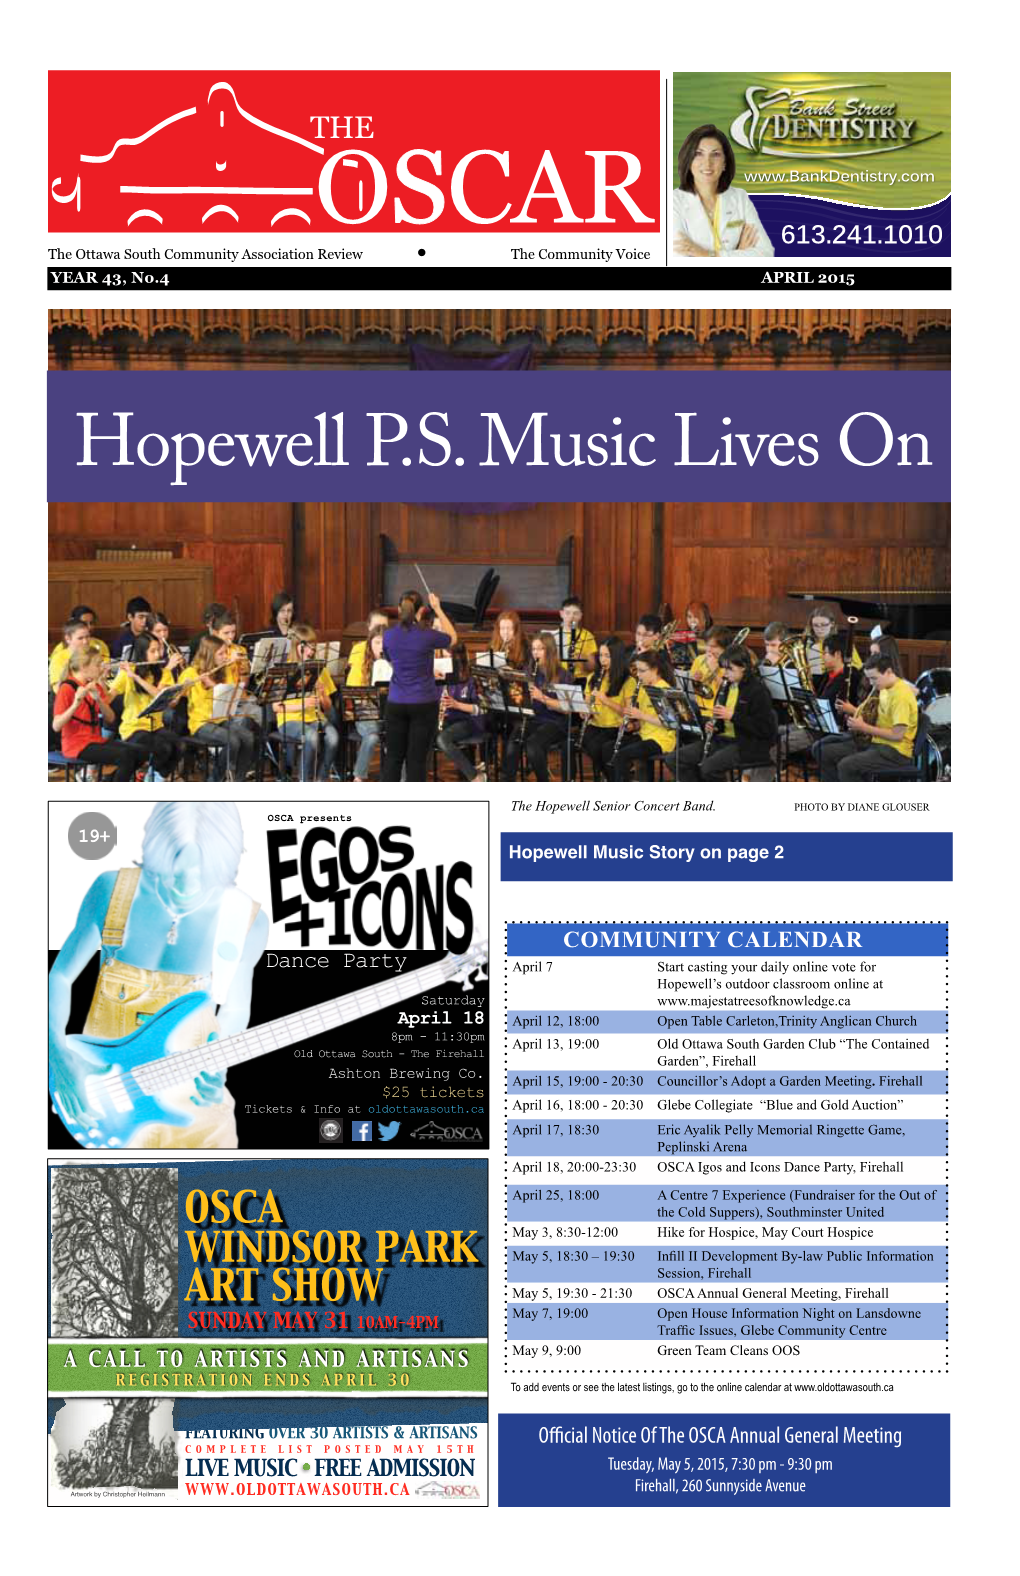 Hopewell P.S. Music Lives On